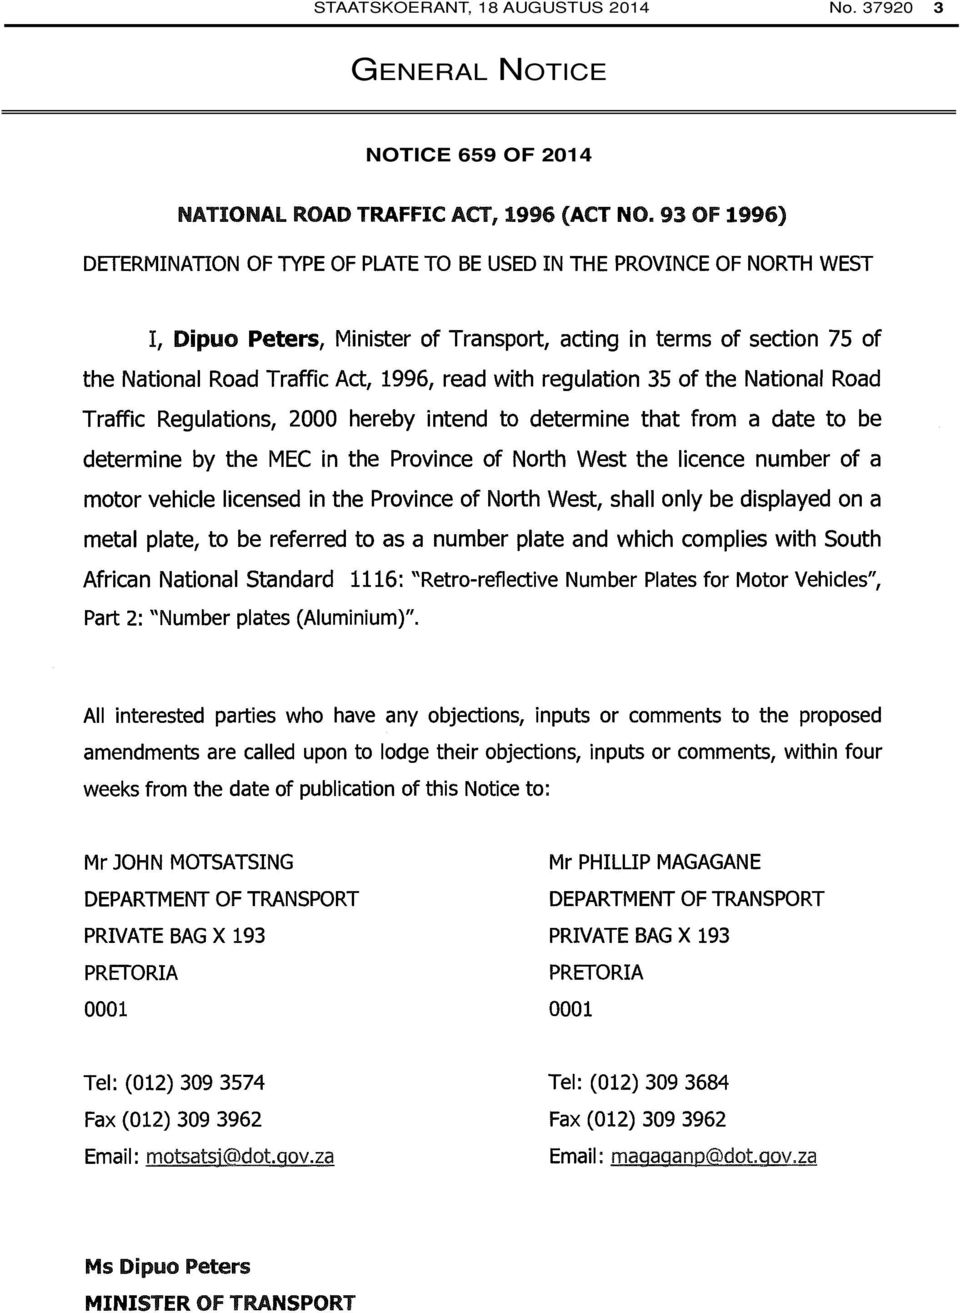 Transport, acting in terms of section 75 of the National Road Traffic Act, 1996, read with regulation 35 of the National Road Traffic Regulations, 2000 hereby intend to determine that from a date to